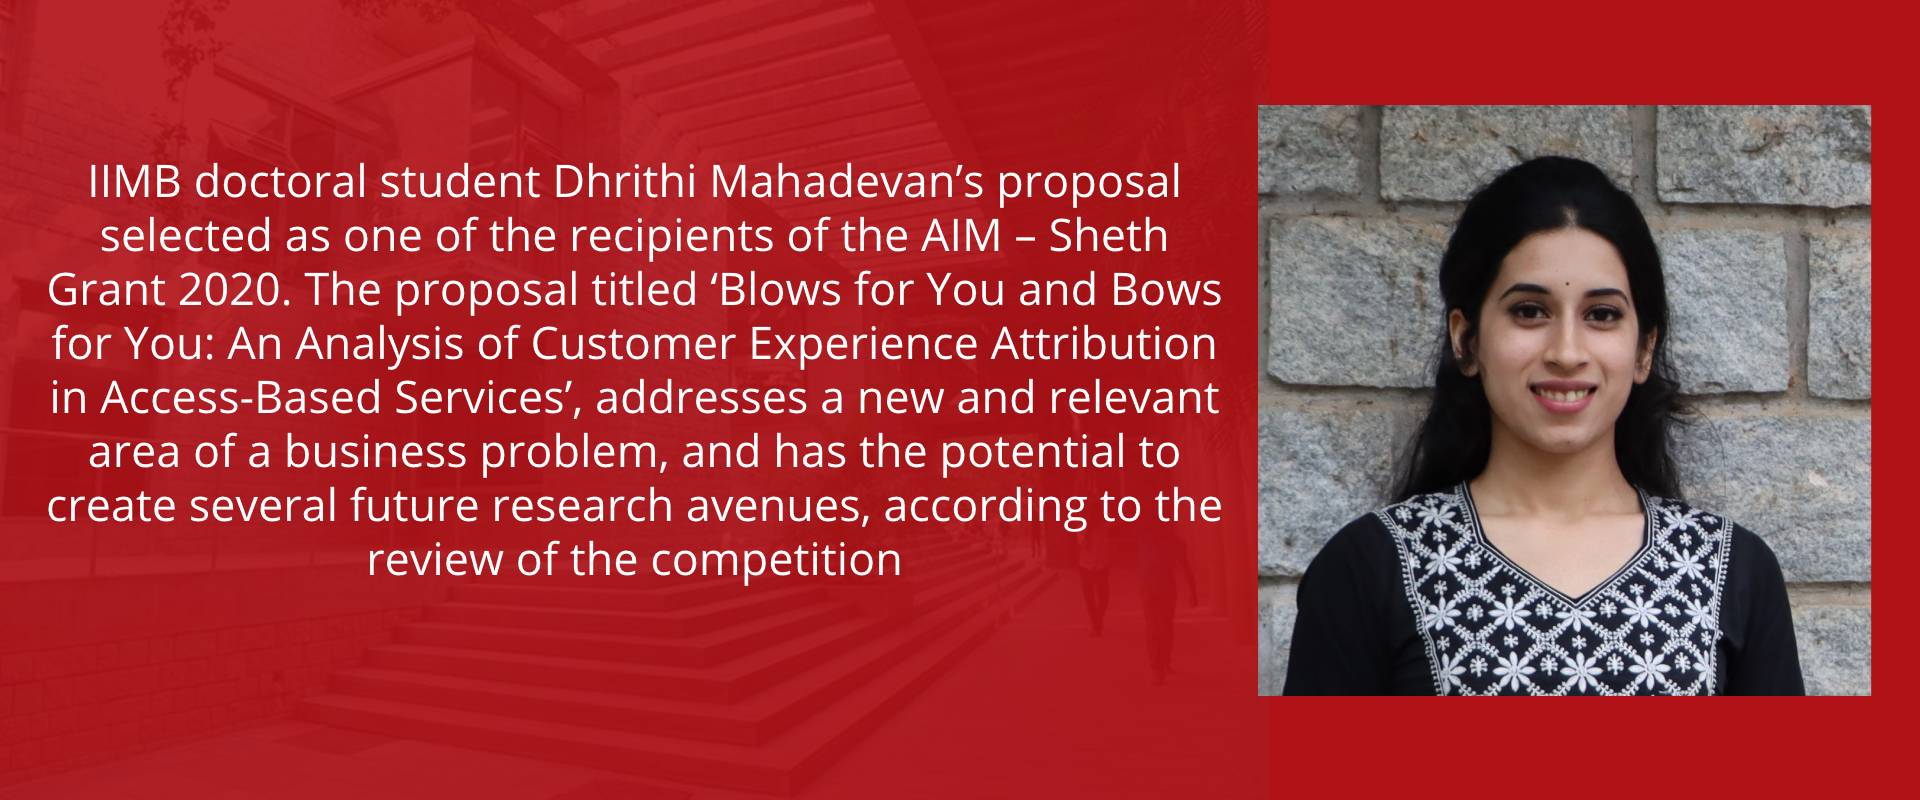 IIMB doctoral student Dhrithi Mahadevan’s proposal selected as one of the recipients of the AIM – Sheth Grant 2020